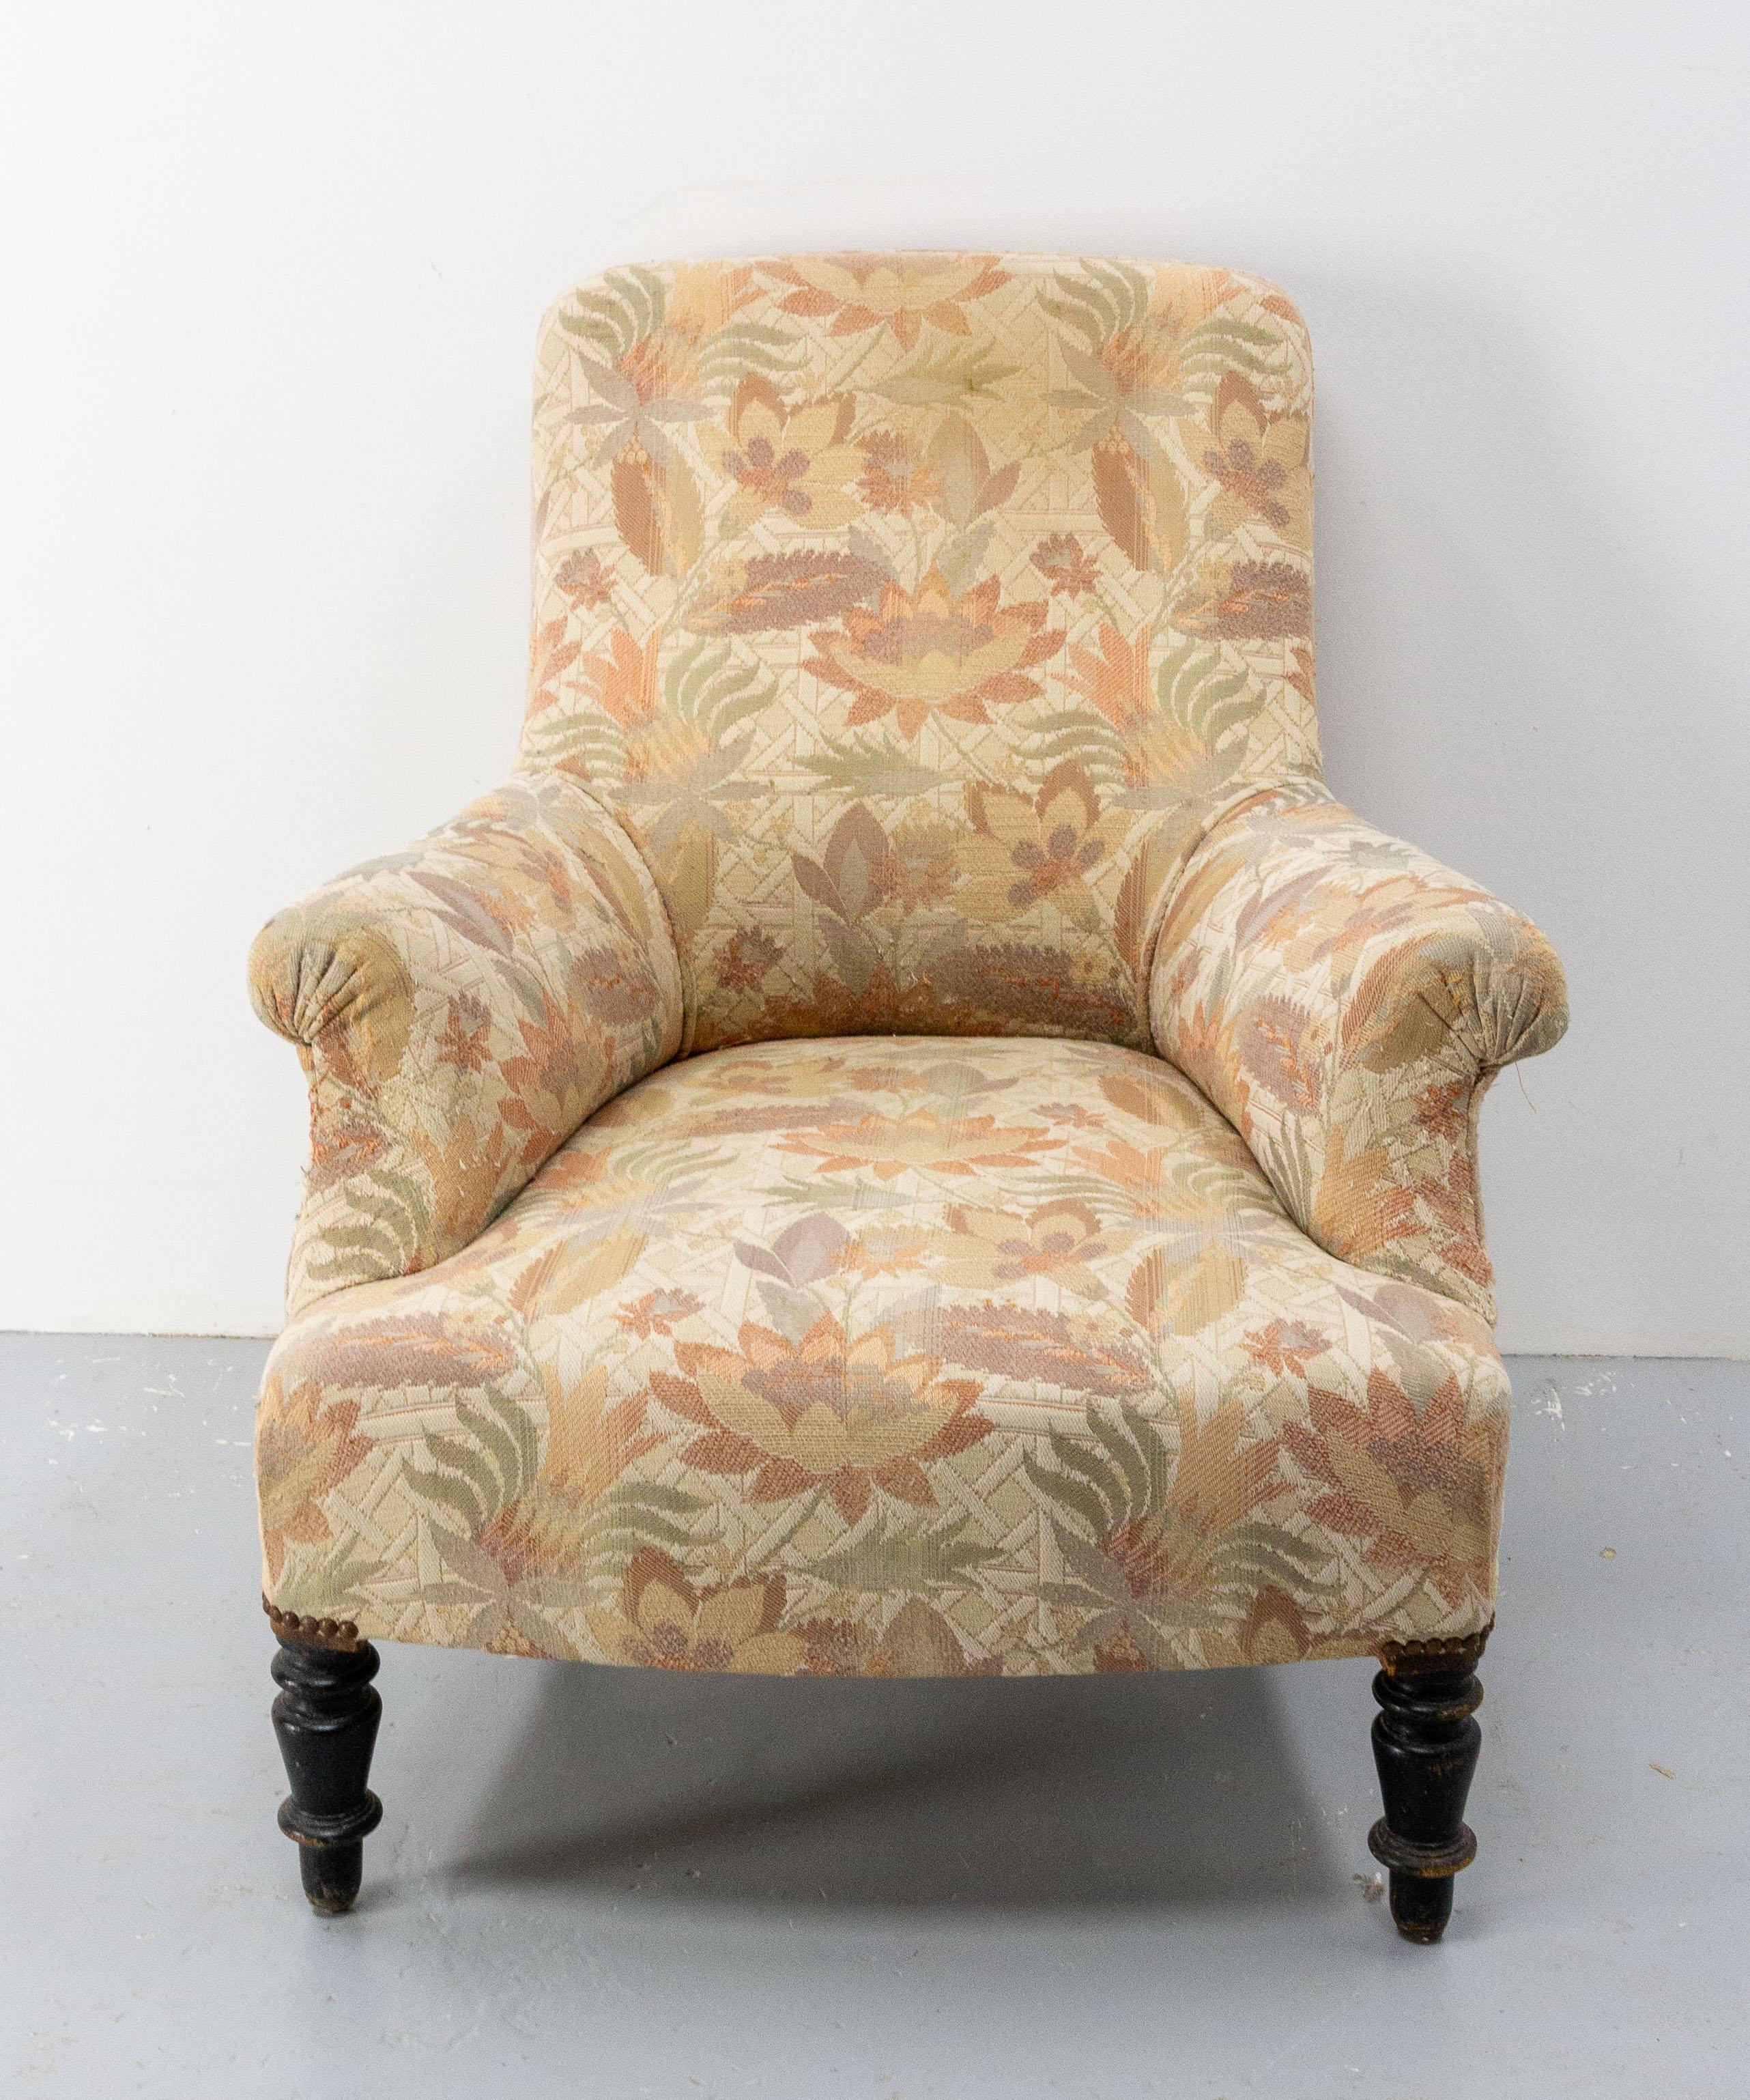 Fauteuil armchair French Napoleon III, circa 1880
Antique, 19th century,
Sound and solid 
To be recovered
Very comfortable.

Shipping:
P 89 L 75 H 87 20 kg.